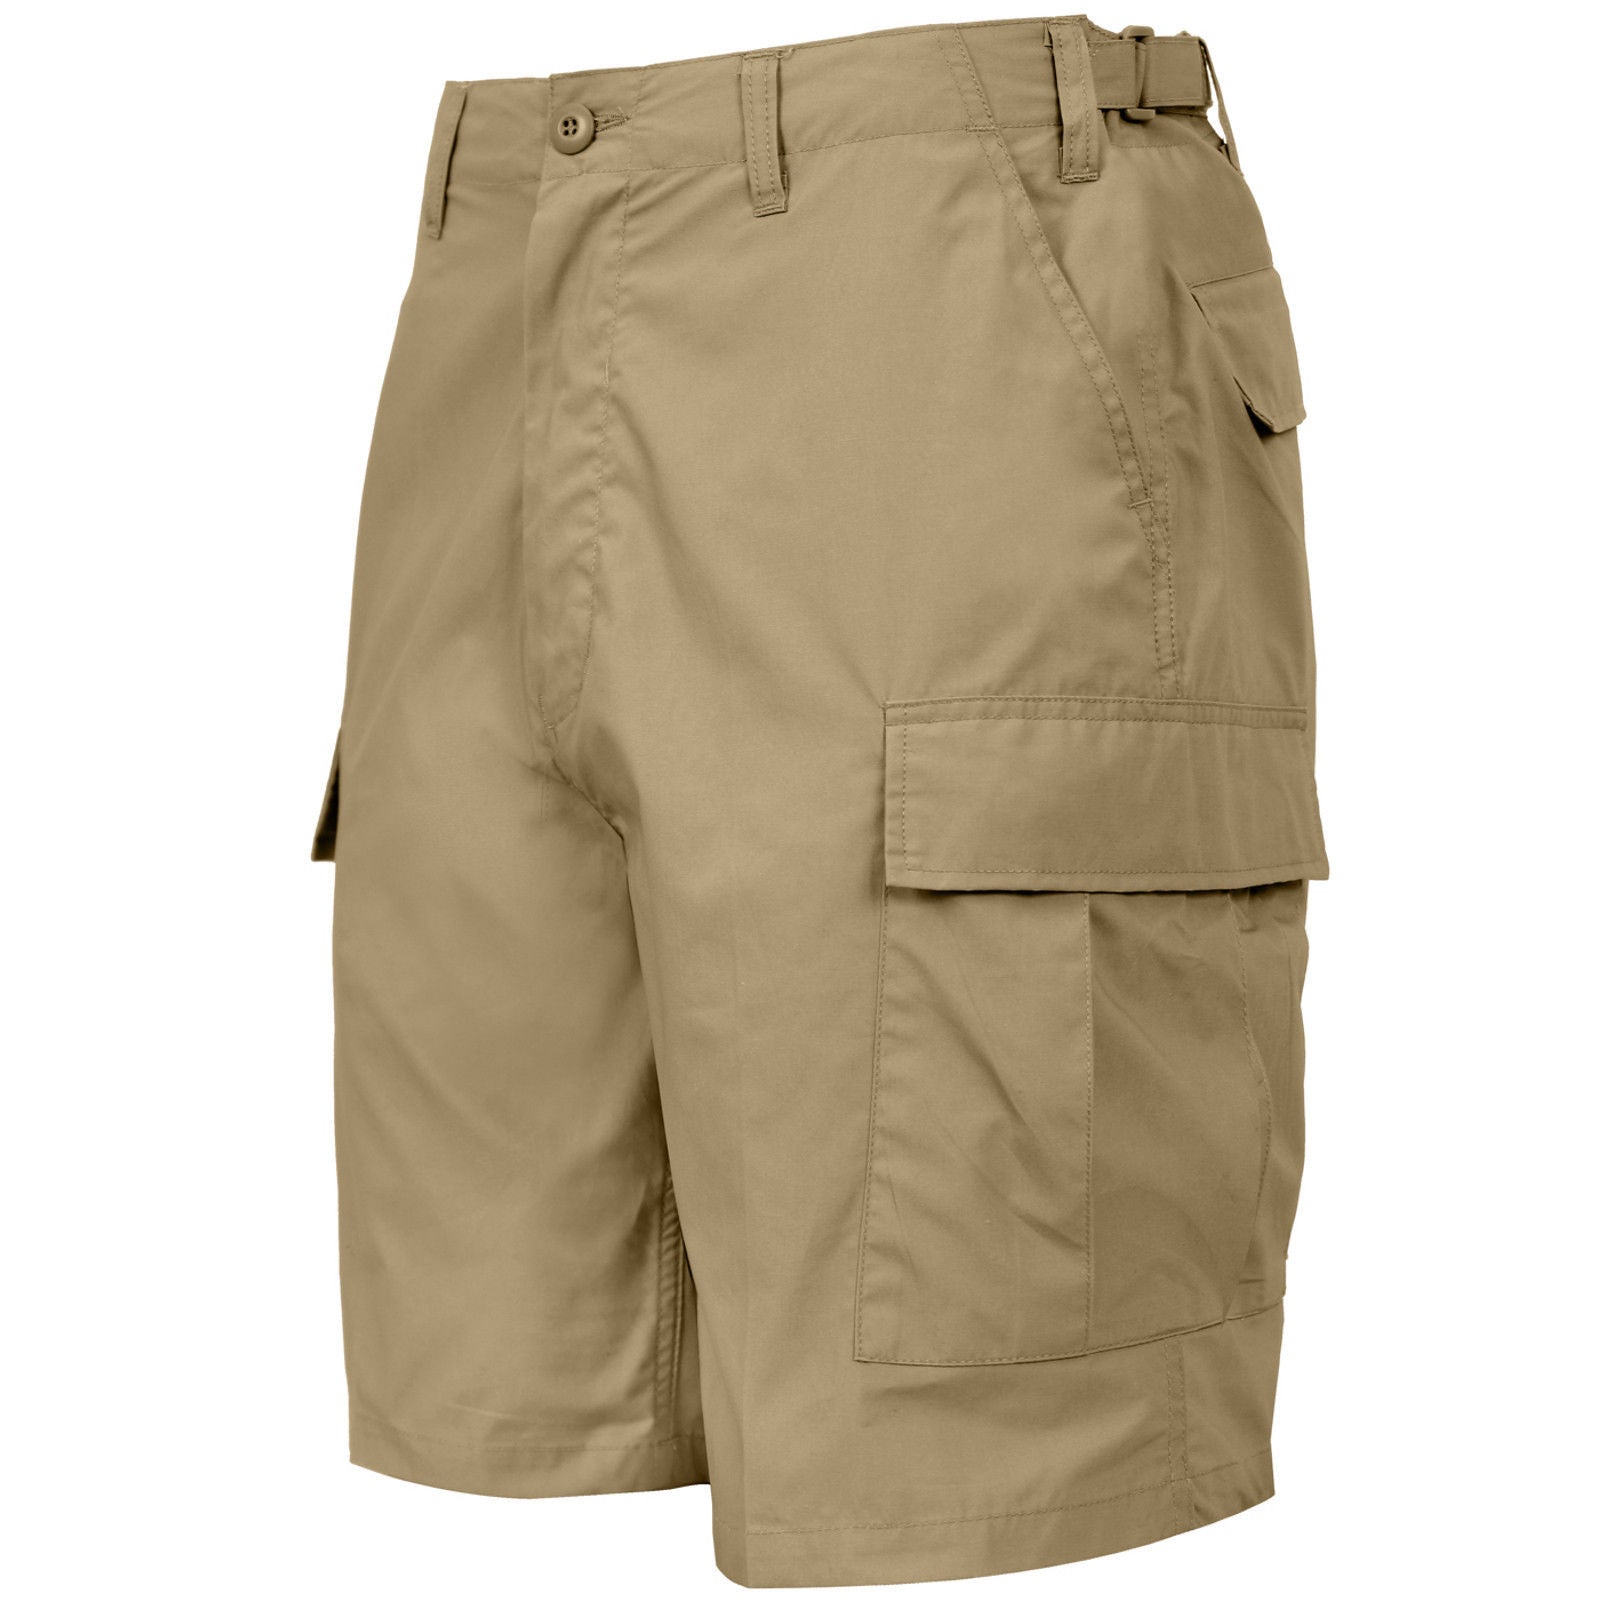 Black or Khaki Lightweight Tactical BDU Shorts - Rothco Summer Weight ...